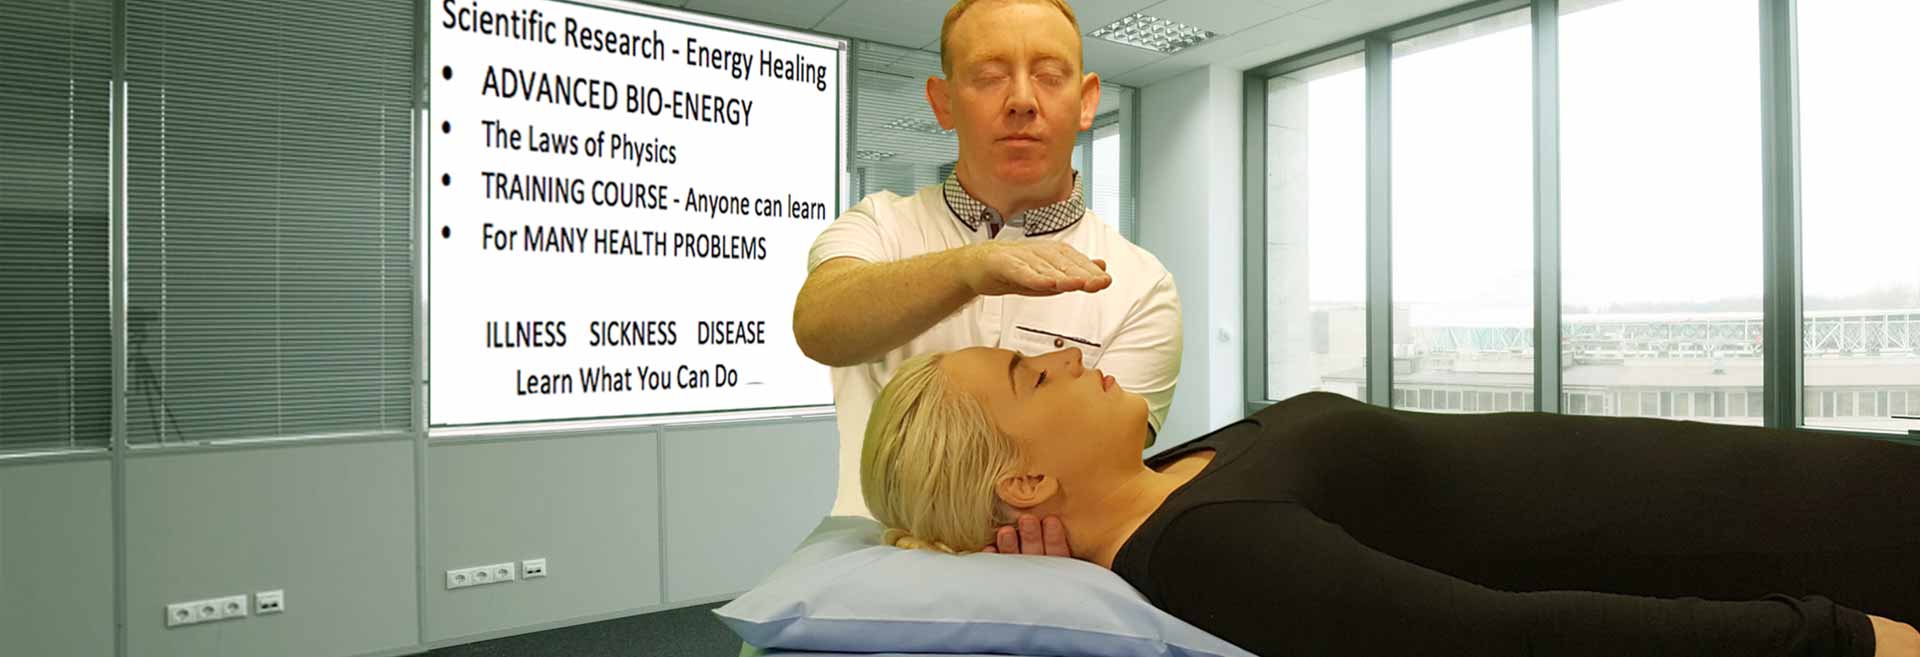 Scientific Research On Energy Healing Methods – Energy Healing Online Training Course